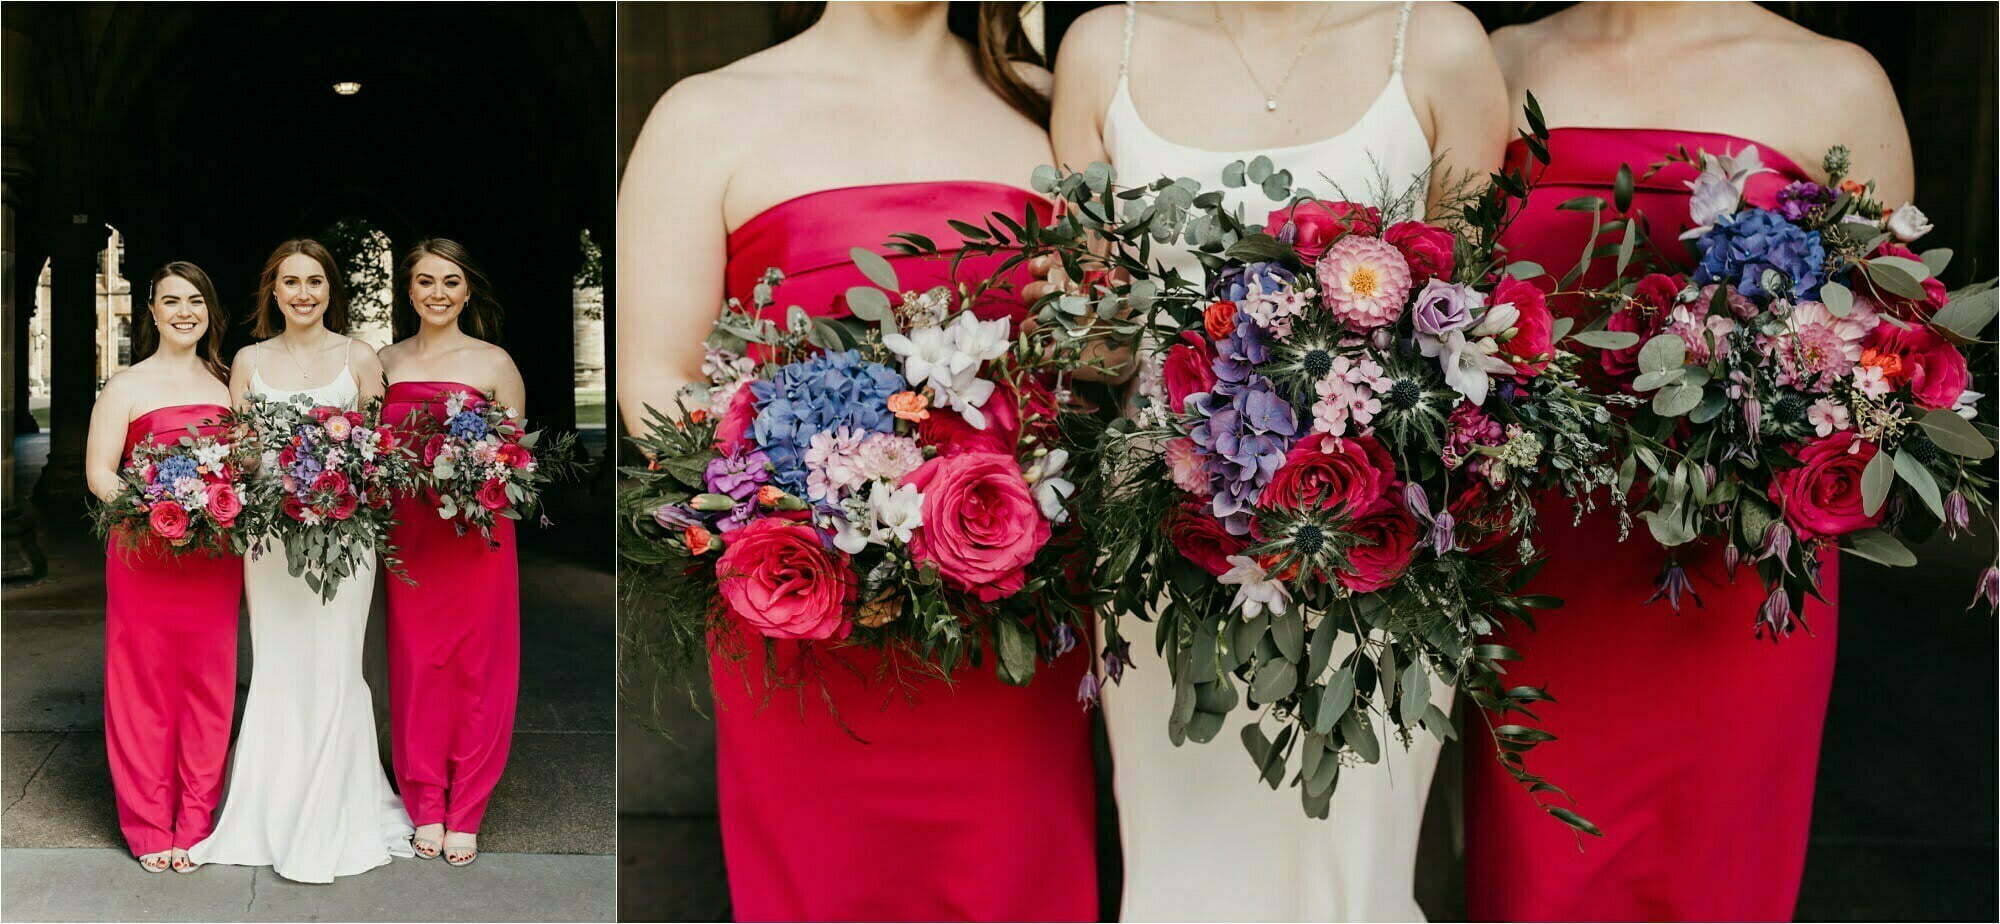 micro wedding at glasgow university chapel bride and bridesmaids in red with bouquets